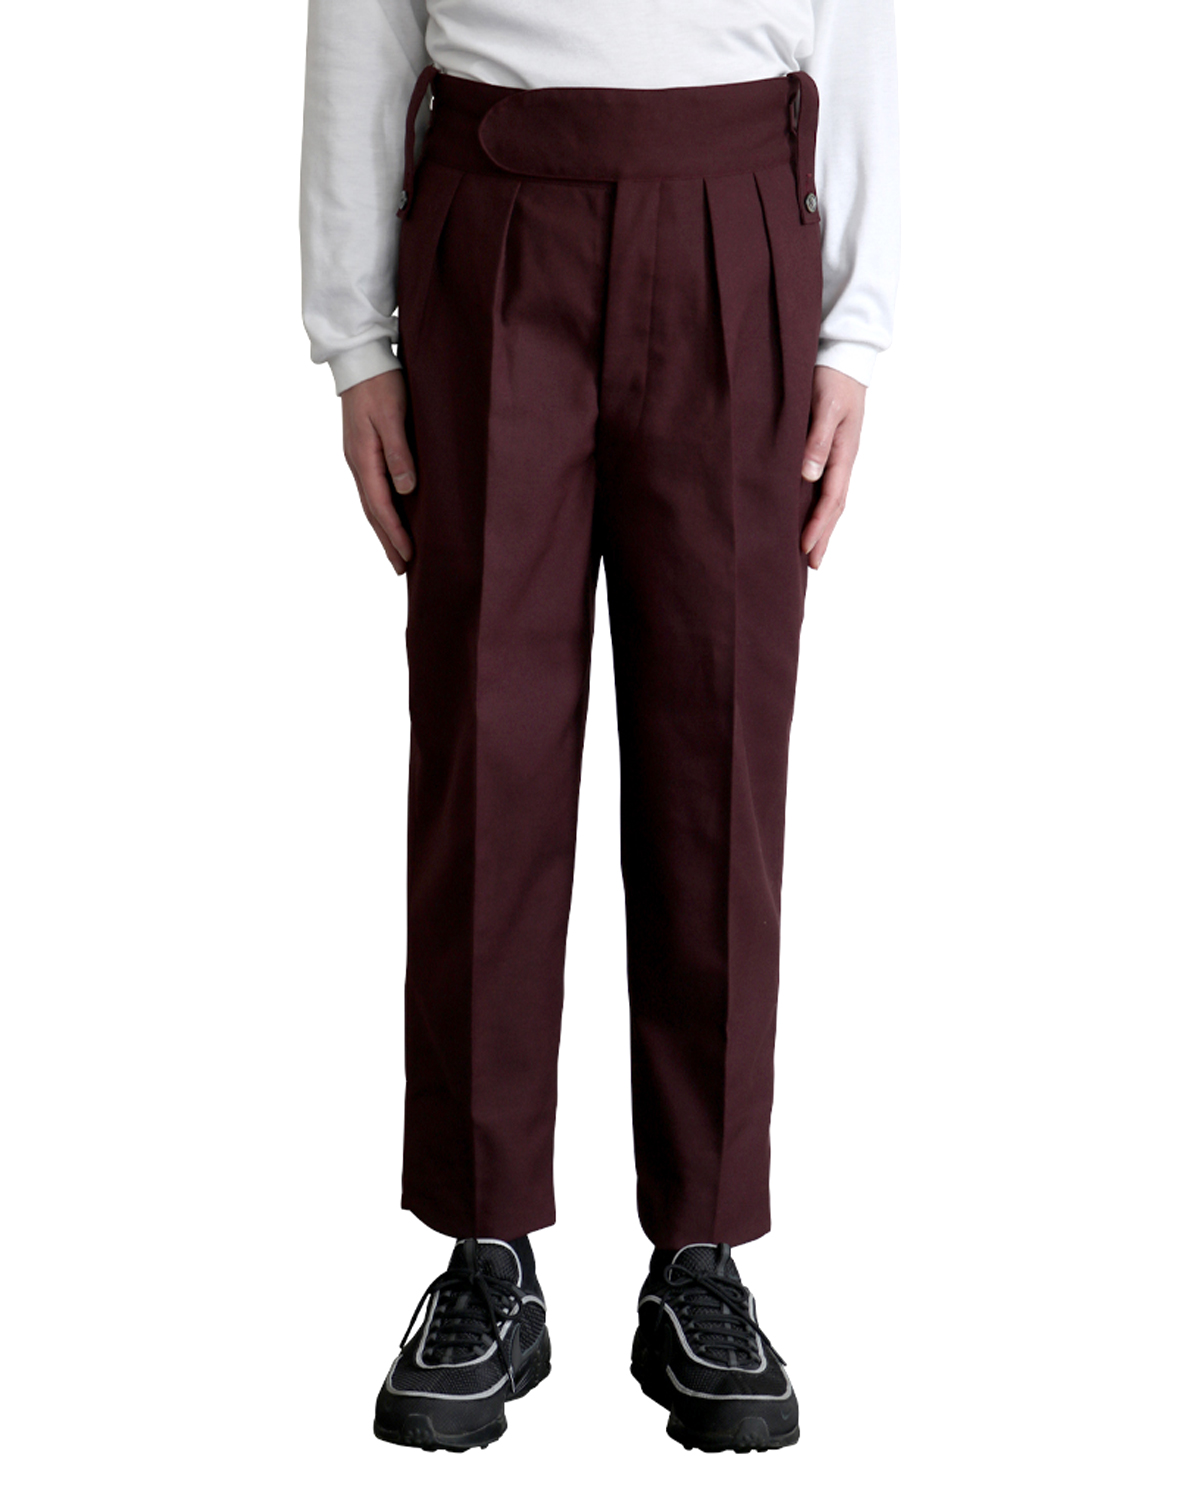 NEAT｜HOPSACK｜BELTLESS - Vintage Bordeaux｜Exclusive｜PRODUCT｜Continuer  Inc.｜メガネ・サングラス｜Select Shop